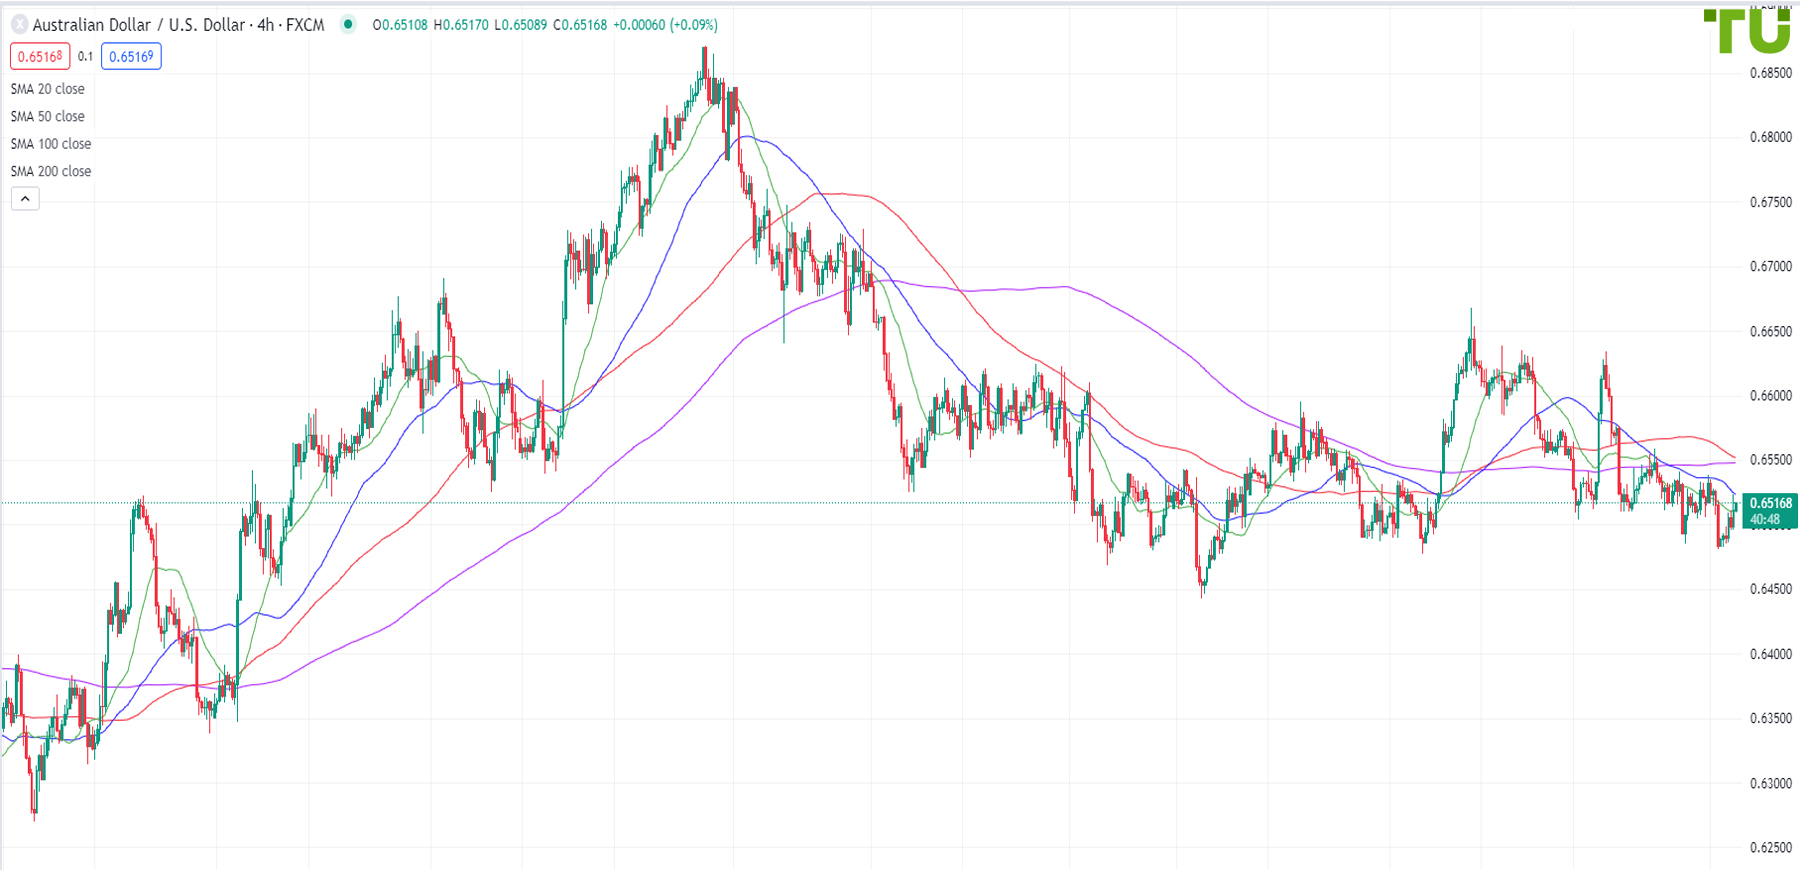 AUD/USD is moving higher